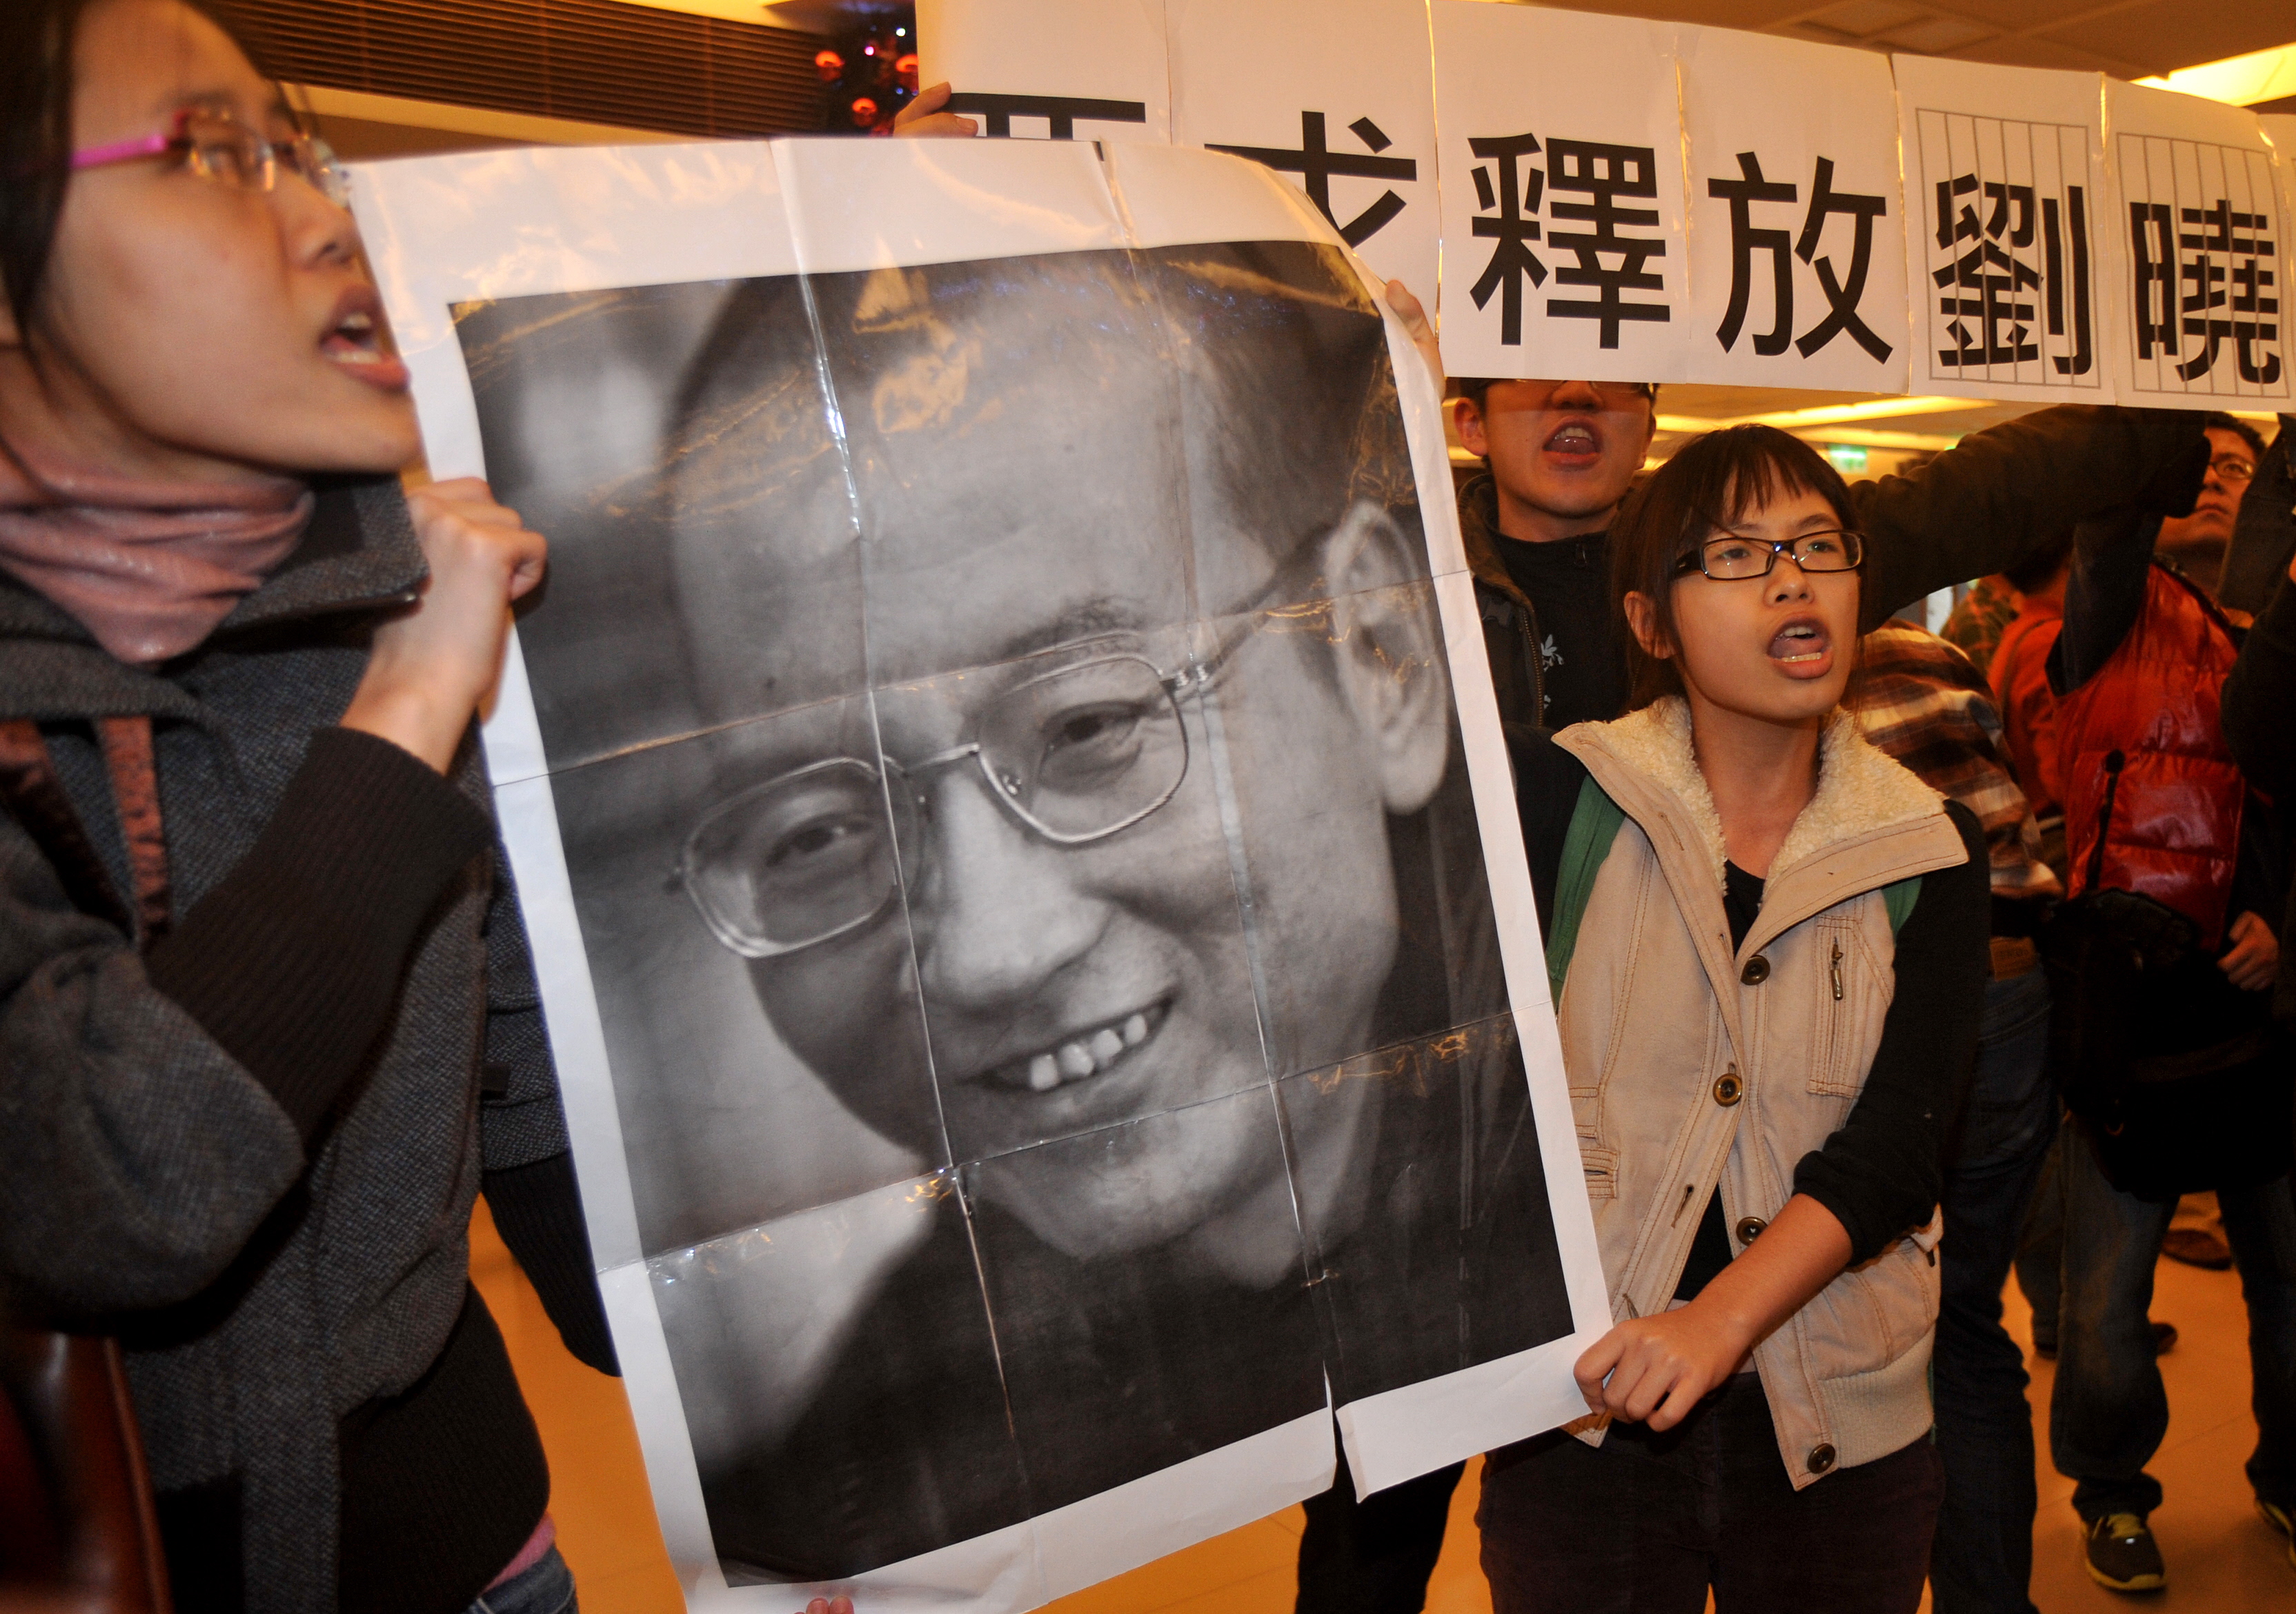 Demonstrators hold a portrait of China's detained Nobel Peace Prize winner Liu Xiaobo demanding his immediate release during a protest in the lobby of Taipei's National Palace Museum where China's top negotiator Chen Yunlin visited on Dec. 20, 2010. (Patrick Lin—AFP/Getty Images)